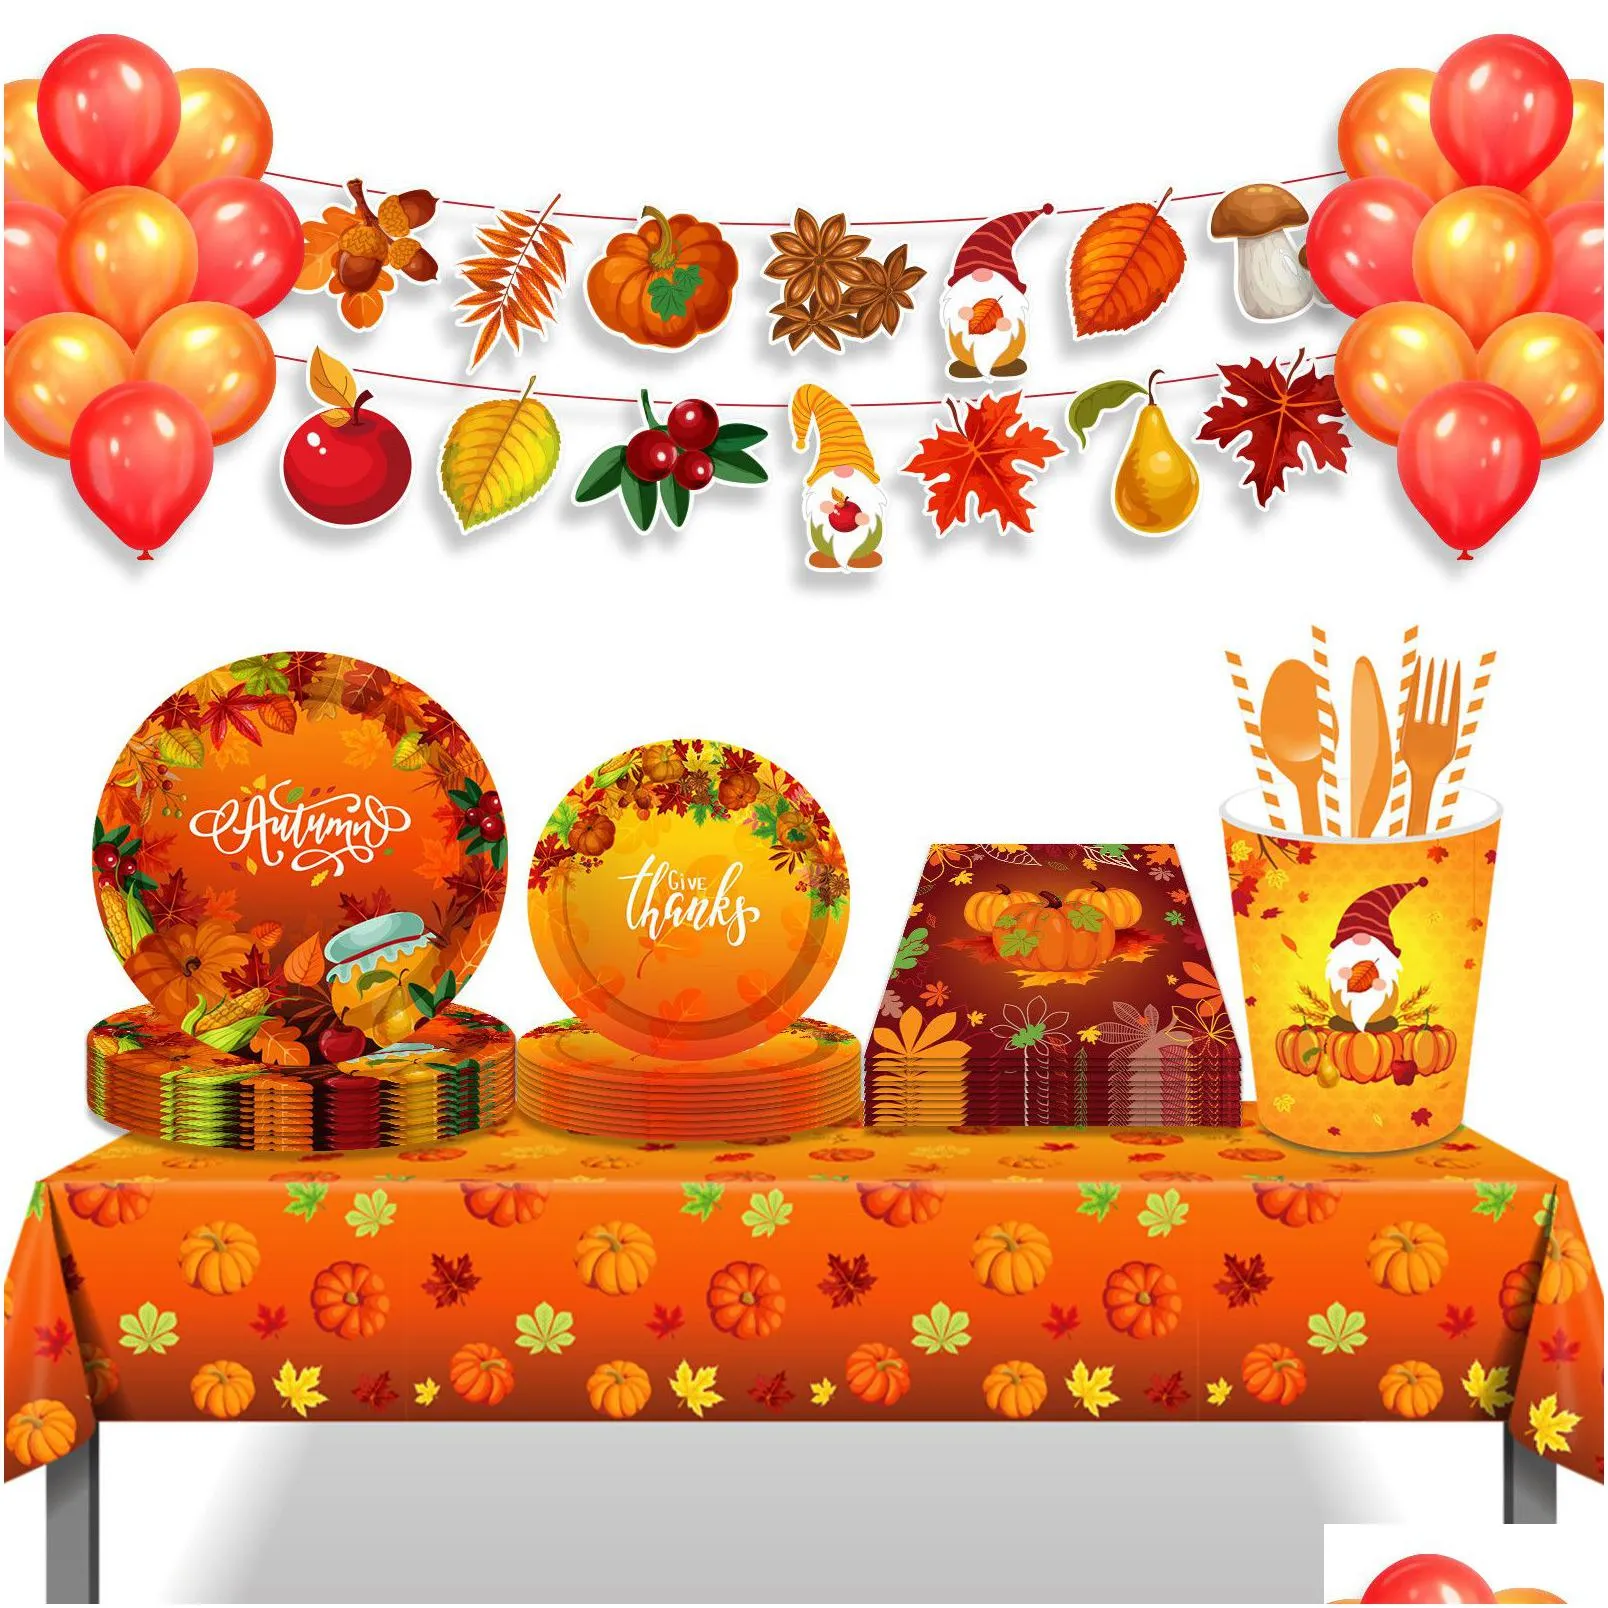 autumn thanksgiving maple leaf paper plates party supplie plates and napkins birthday set party dinnerware serves 8 guests for plates, napkins, cups